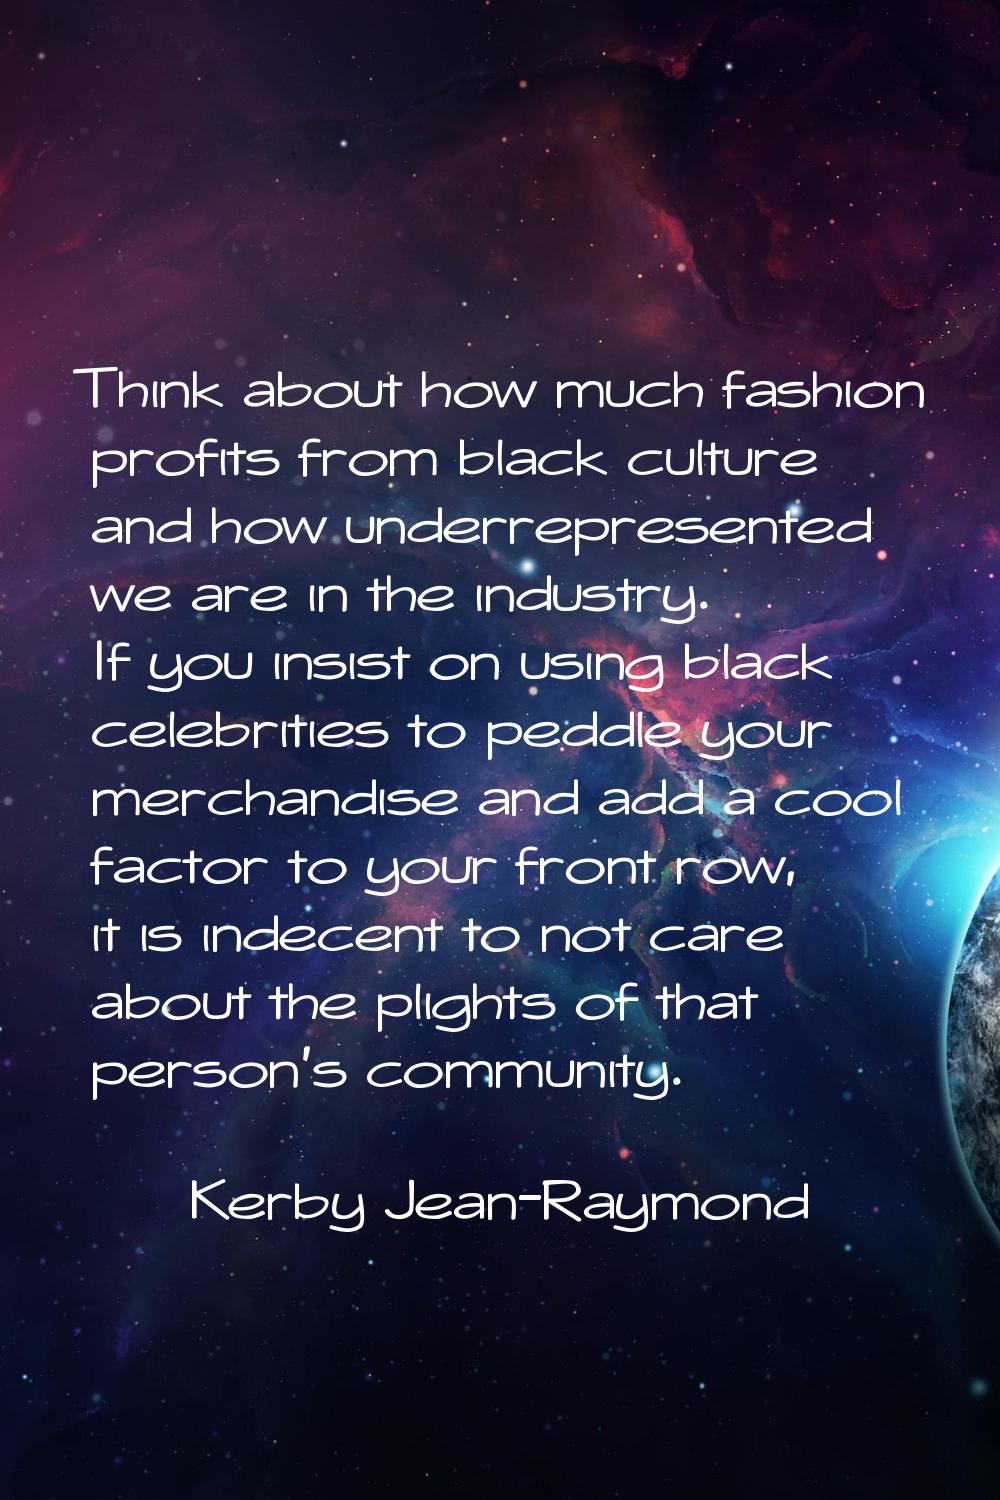 Think about how much fashion profits from black culture and how underrepresented we are in the indu